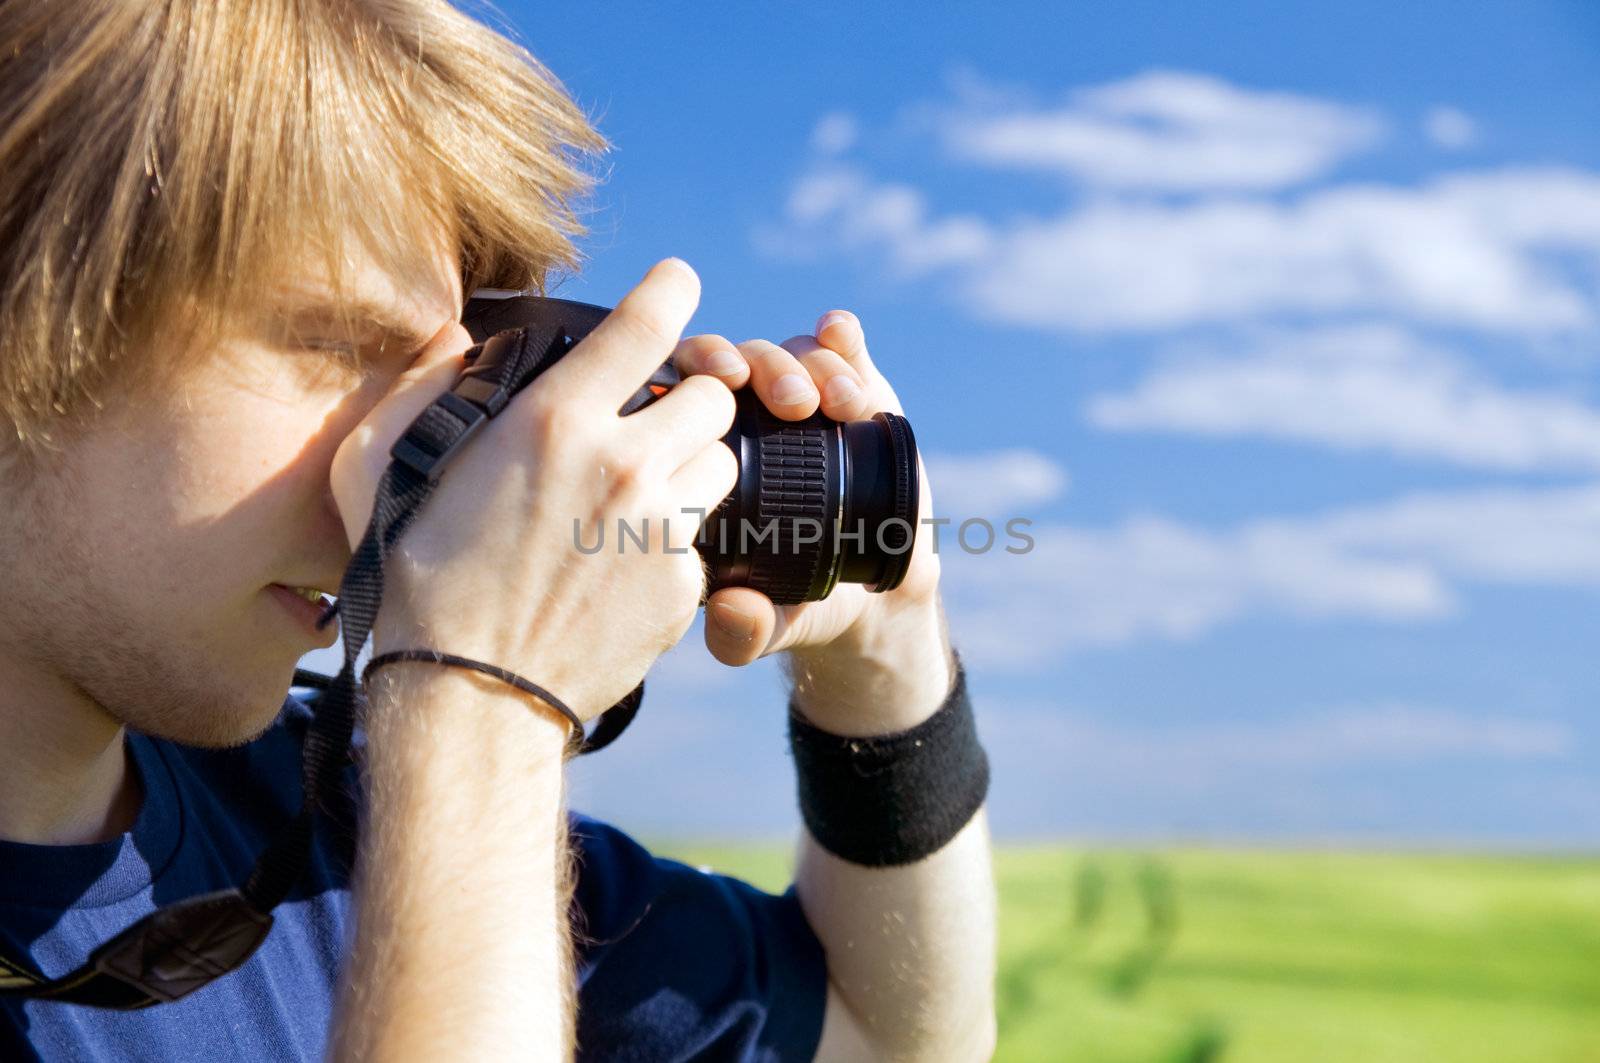 Photographer taking pictures outdoors